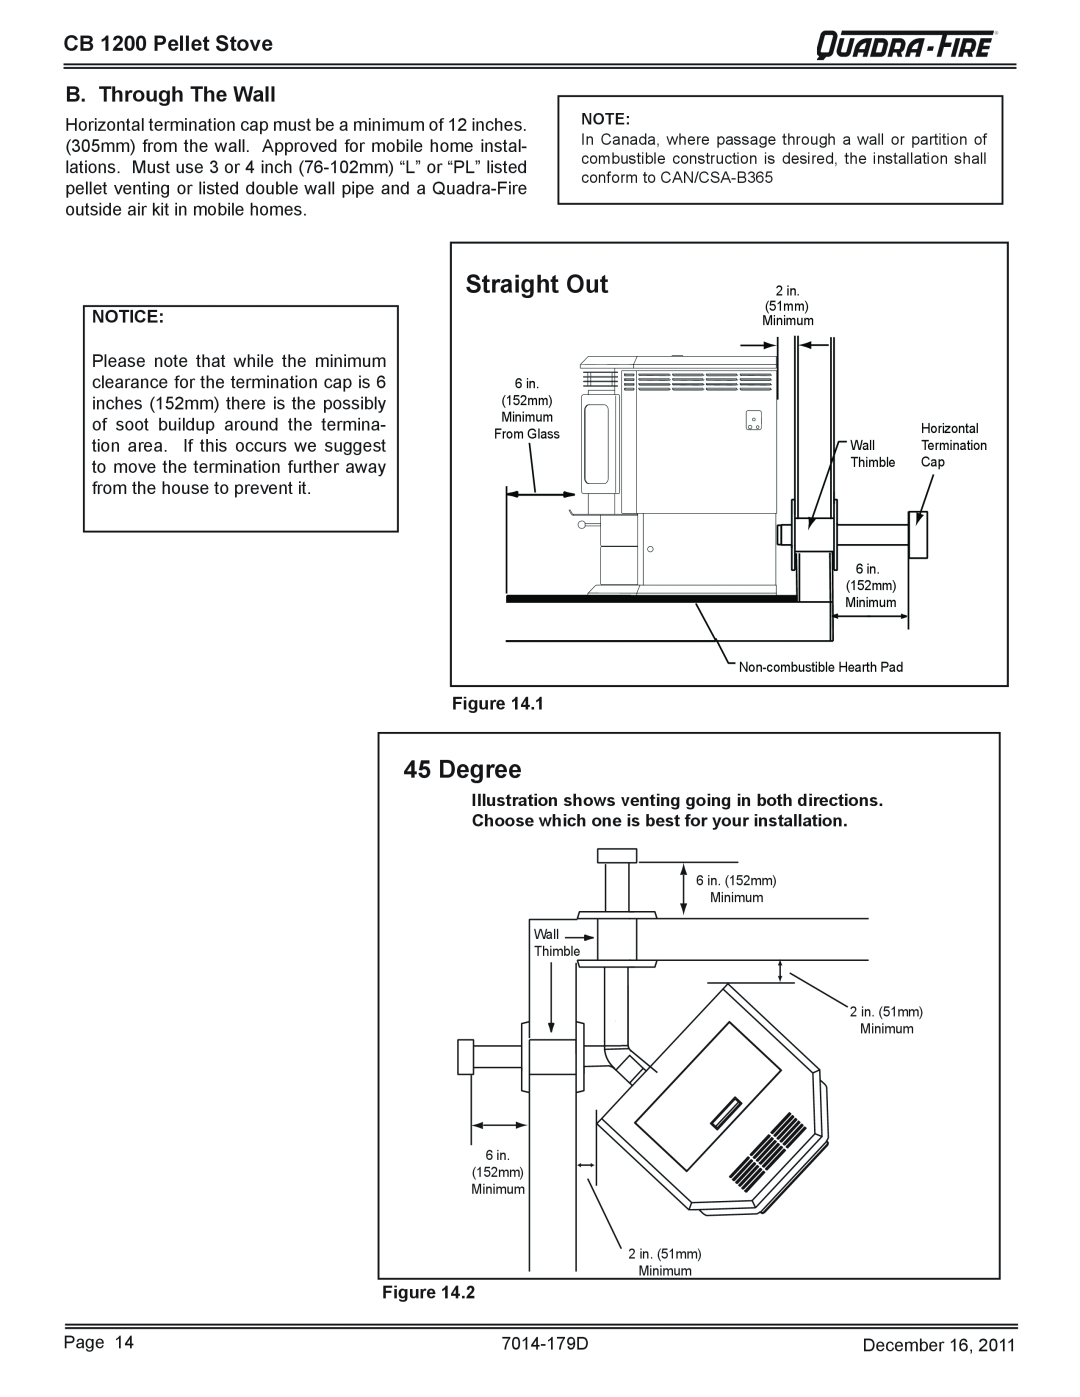 Quadra-Fire CB1200M-MBK owner manual Straight Out, Degree, B. Through The Wall, CB 1200 Pellet Stove 